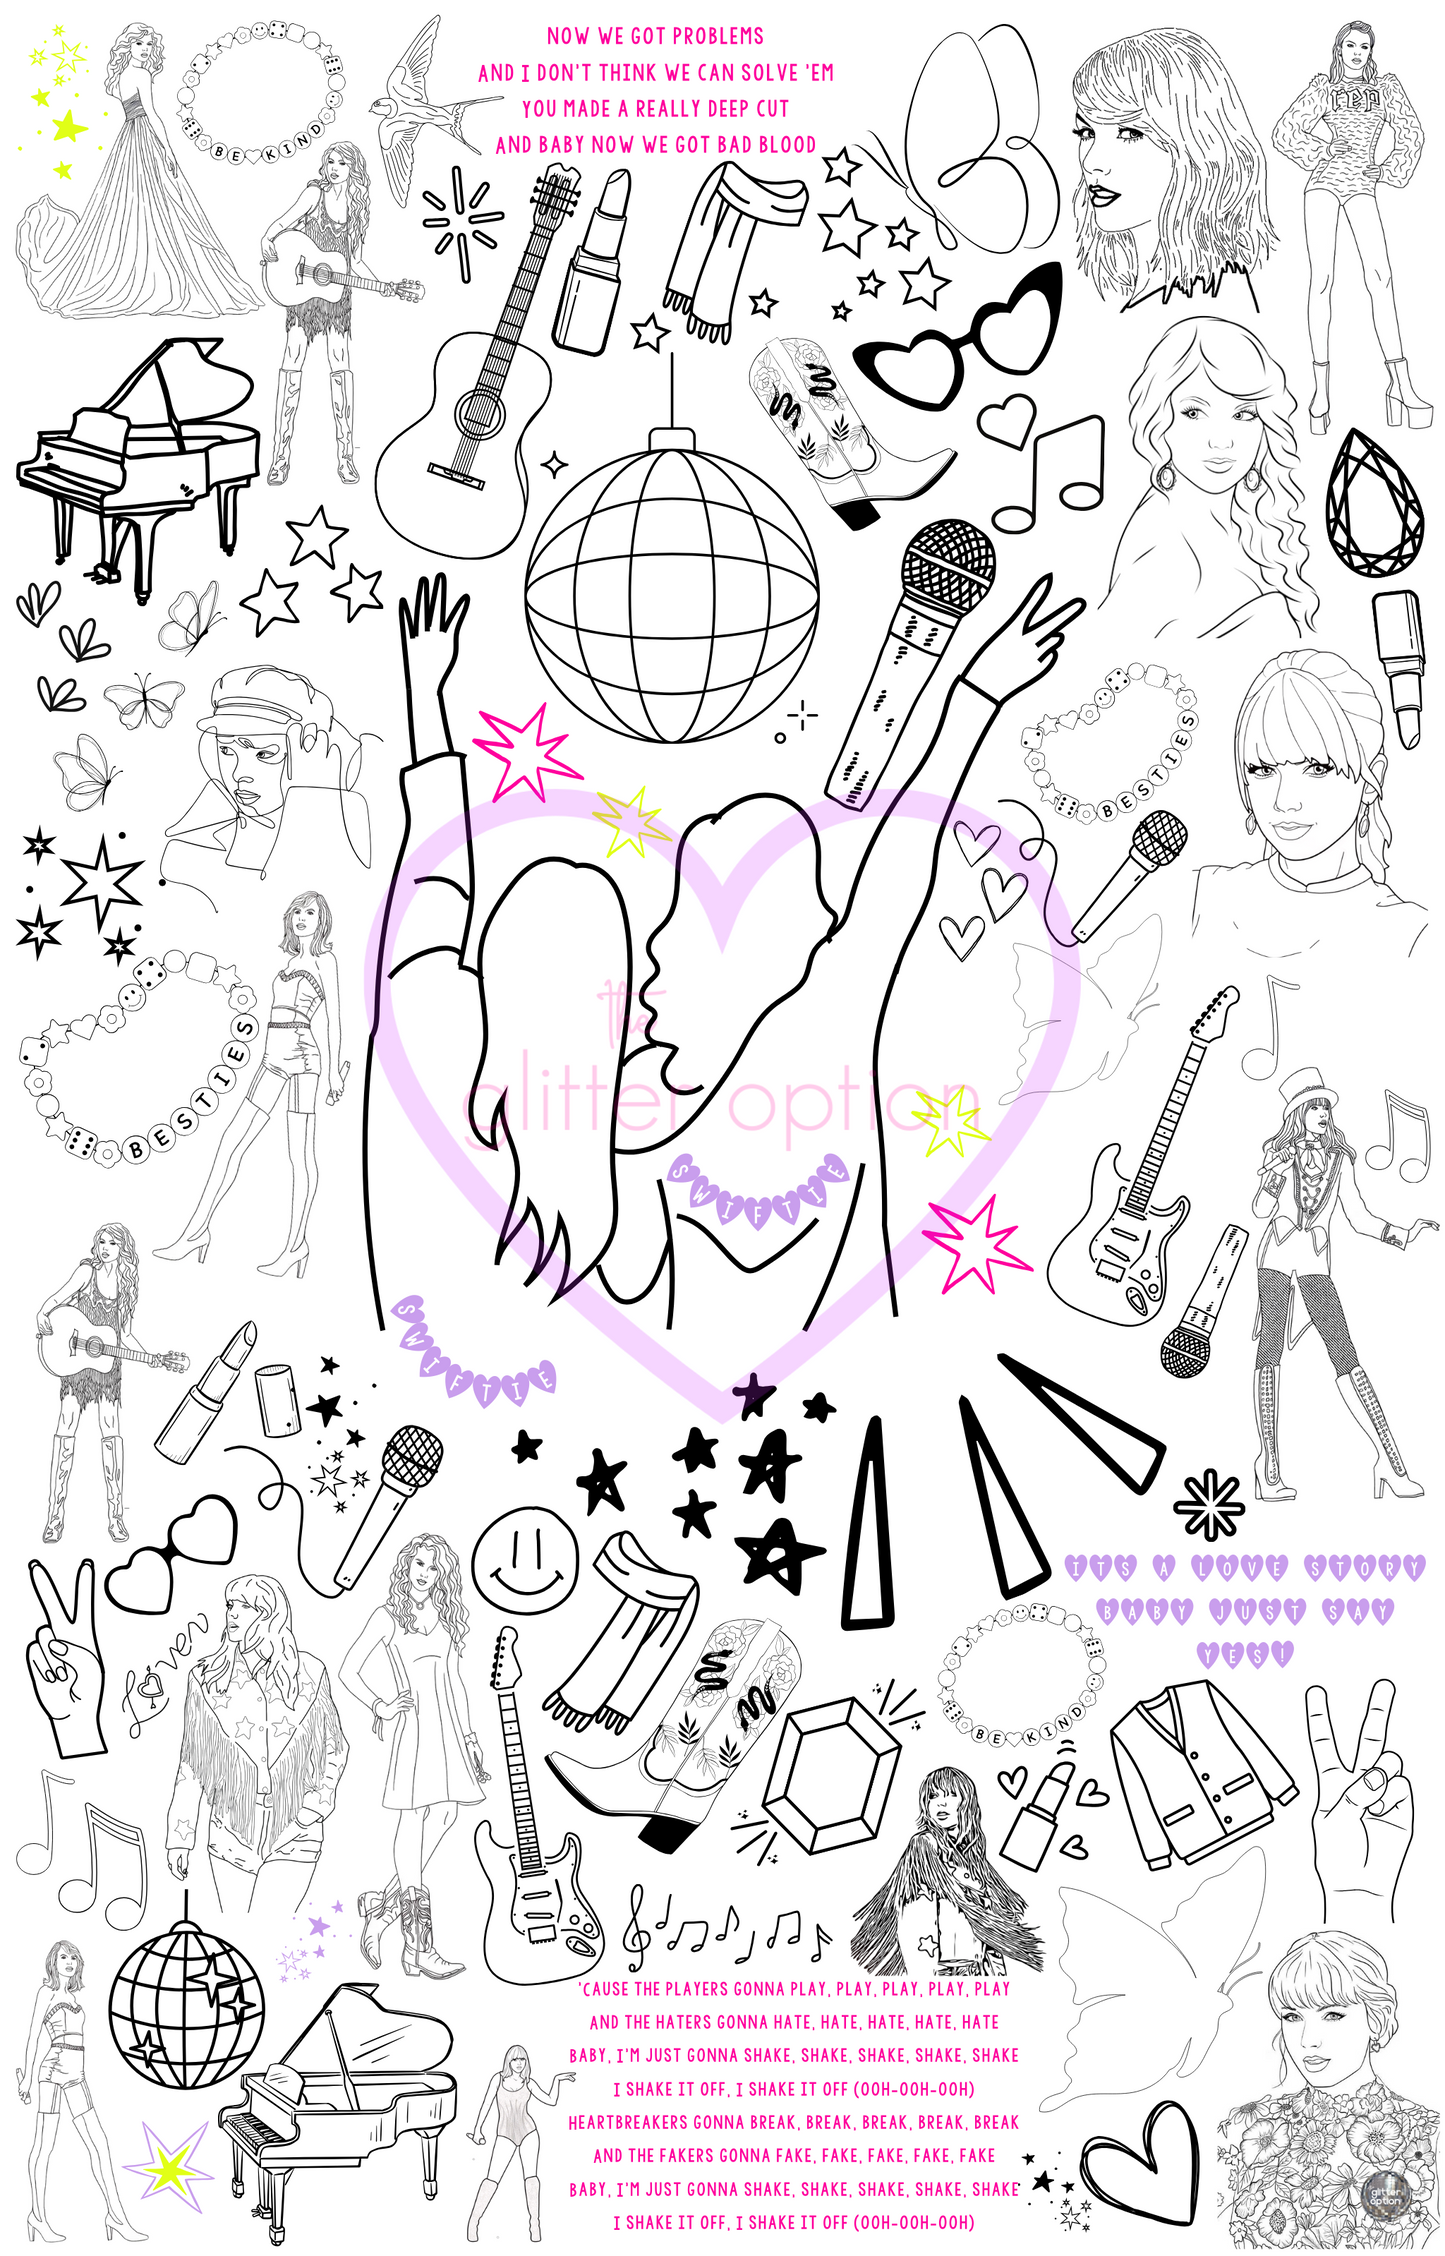 taylor swift coloring page